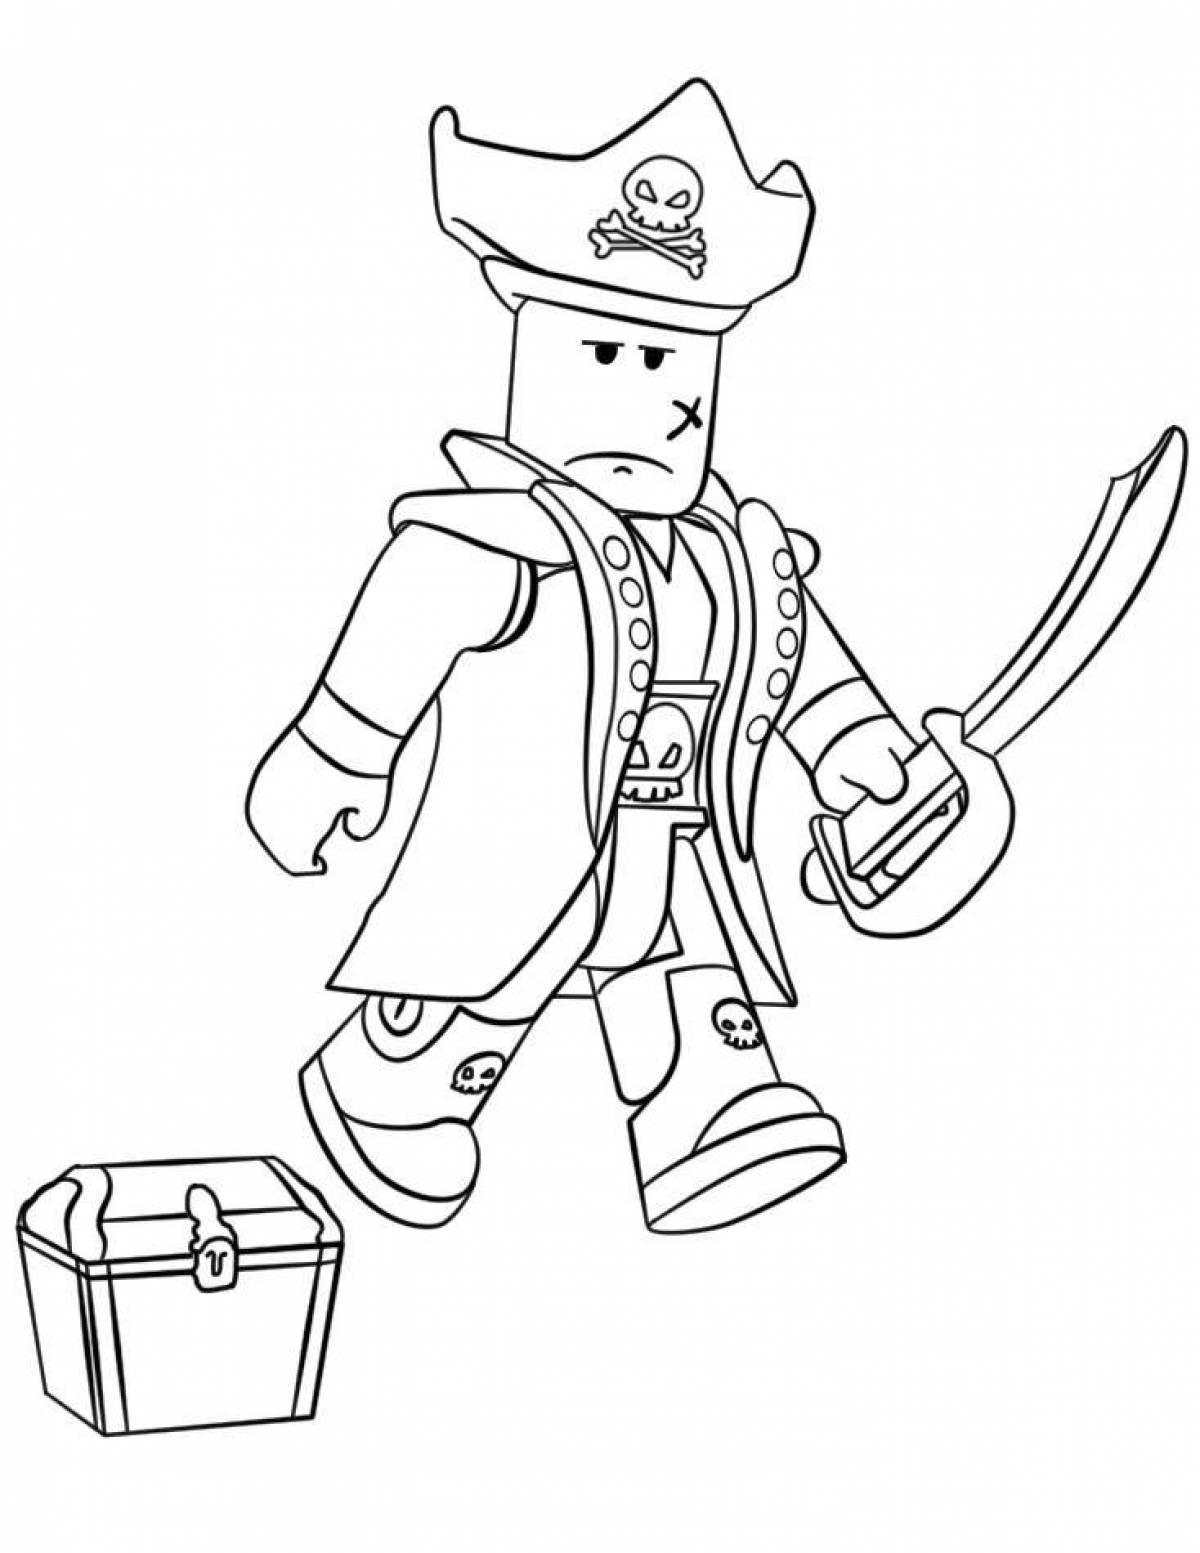 Roblox marvelous coloring book